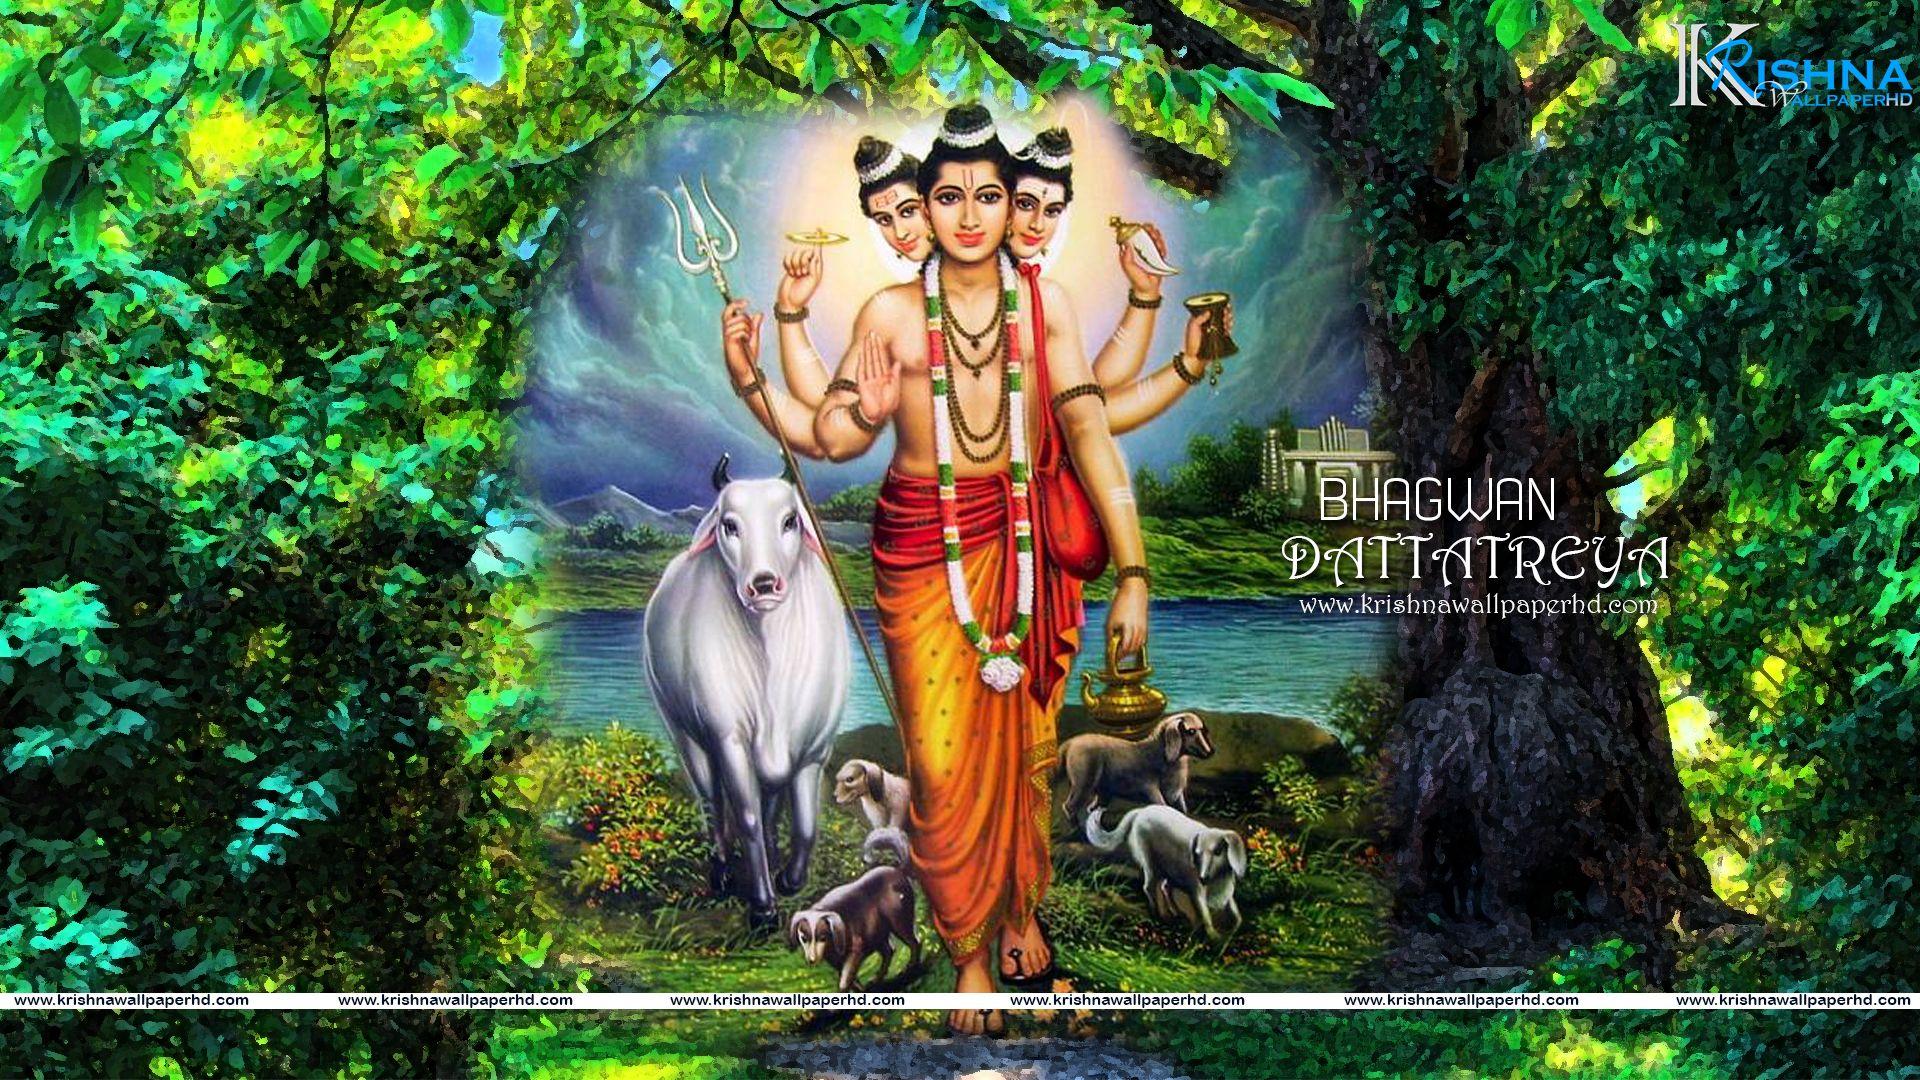 Lord Dattatreya, a Hindu God Exclusive Religious Self Adhesive Poster for  Home, Office Decorations (12 X 18 inches)